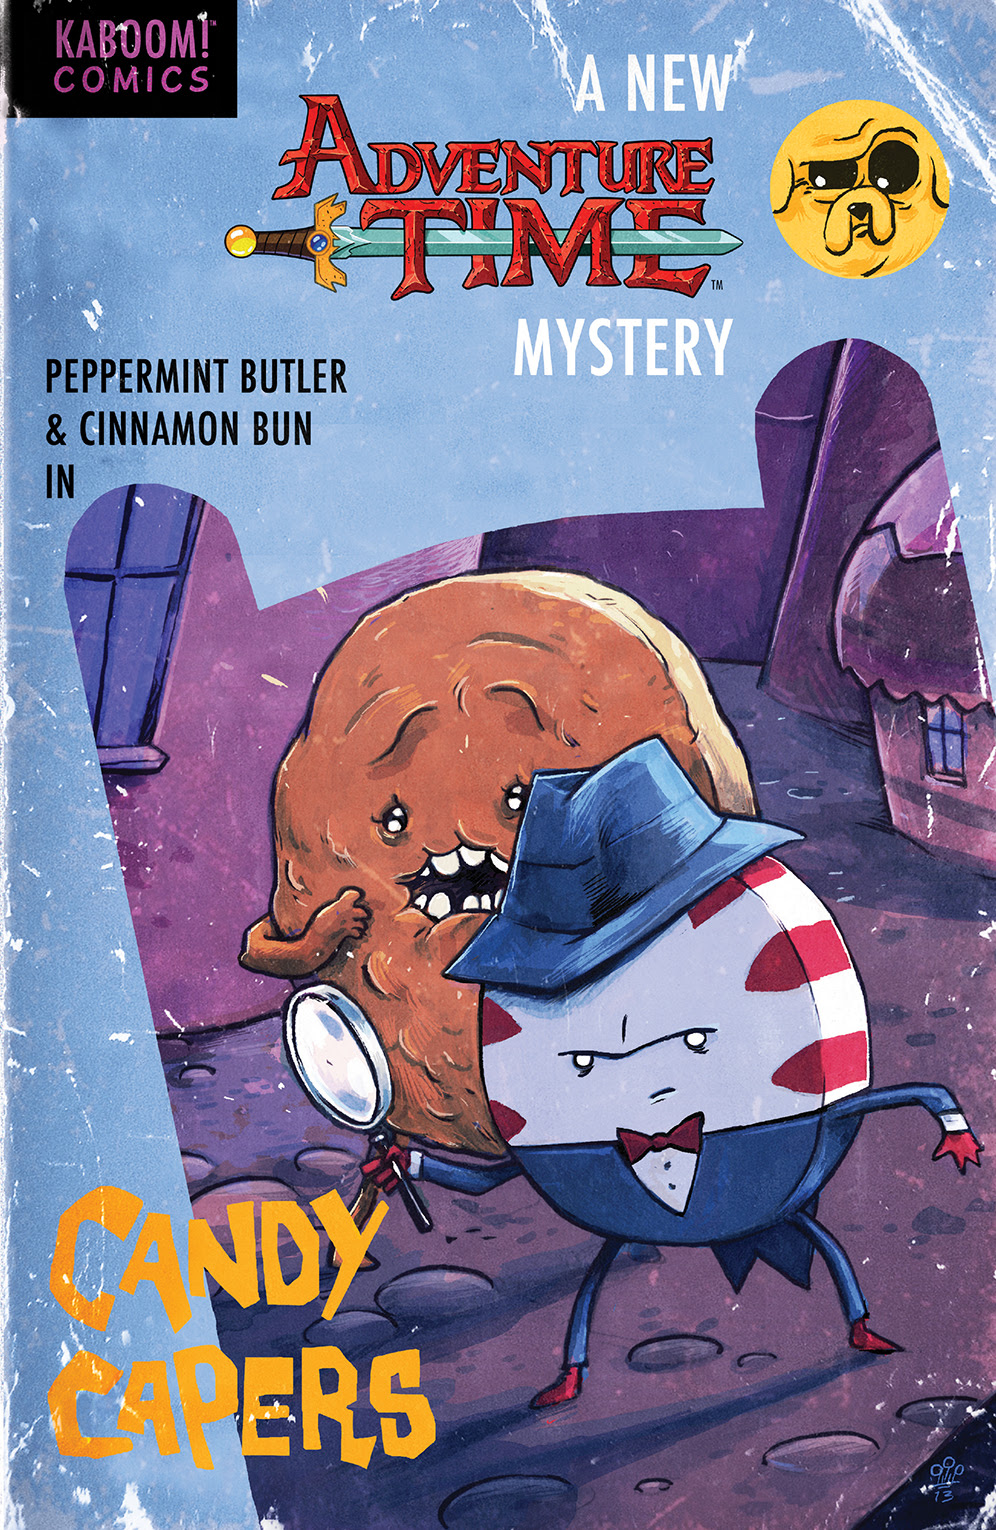 ADVENTURE TIME: CANDY CAPERS TP Cover by Michael Dialynas